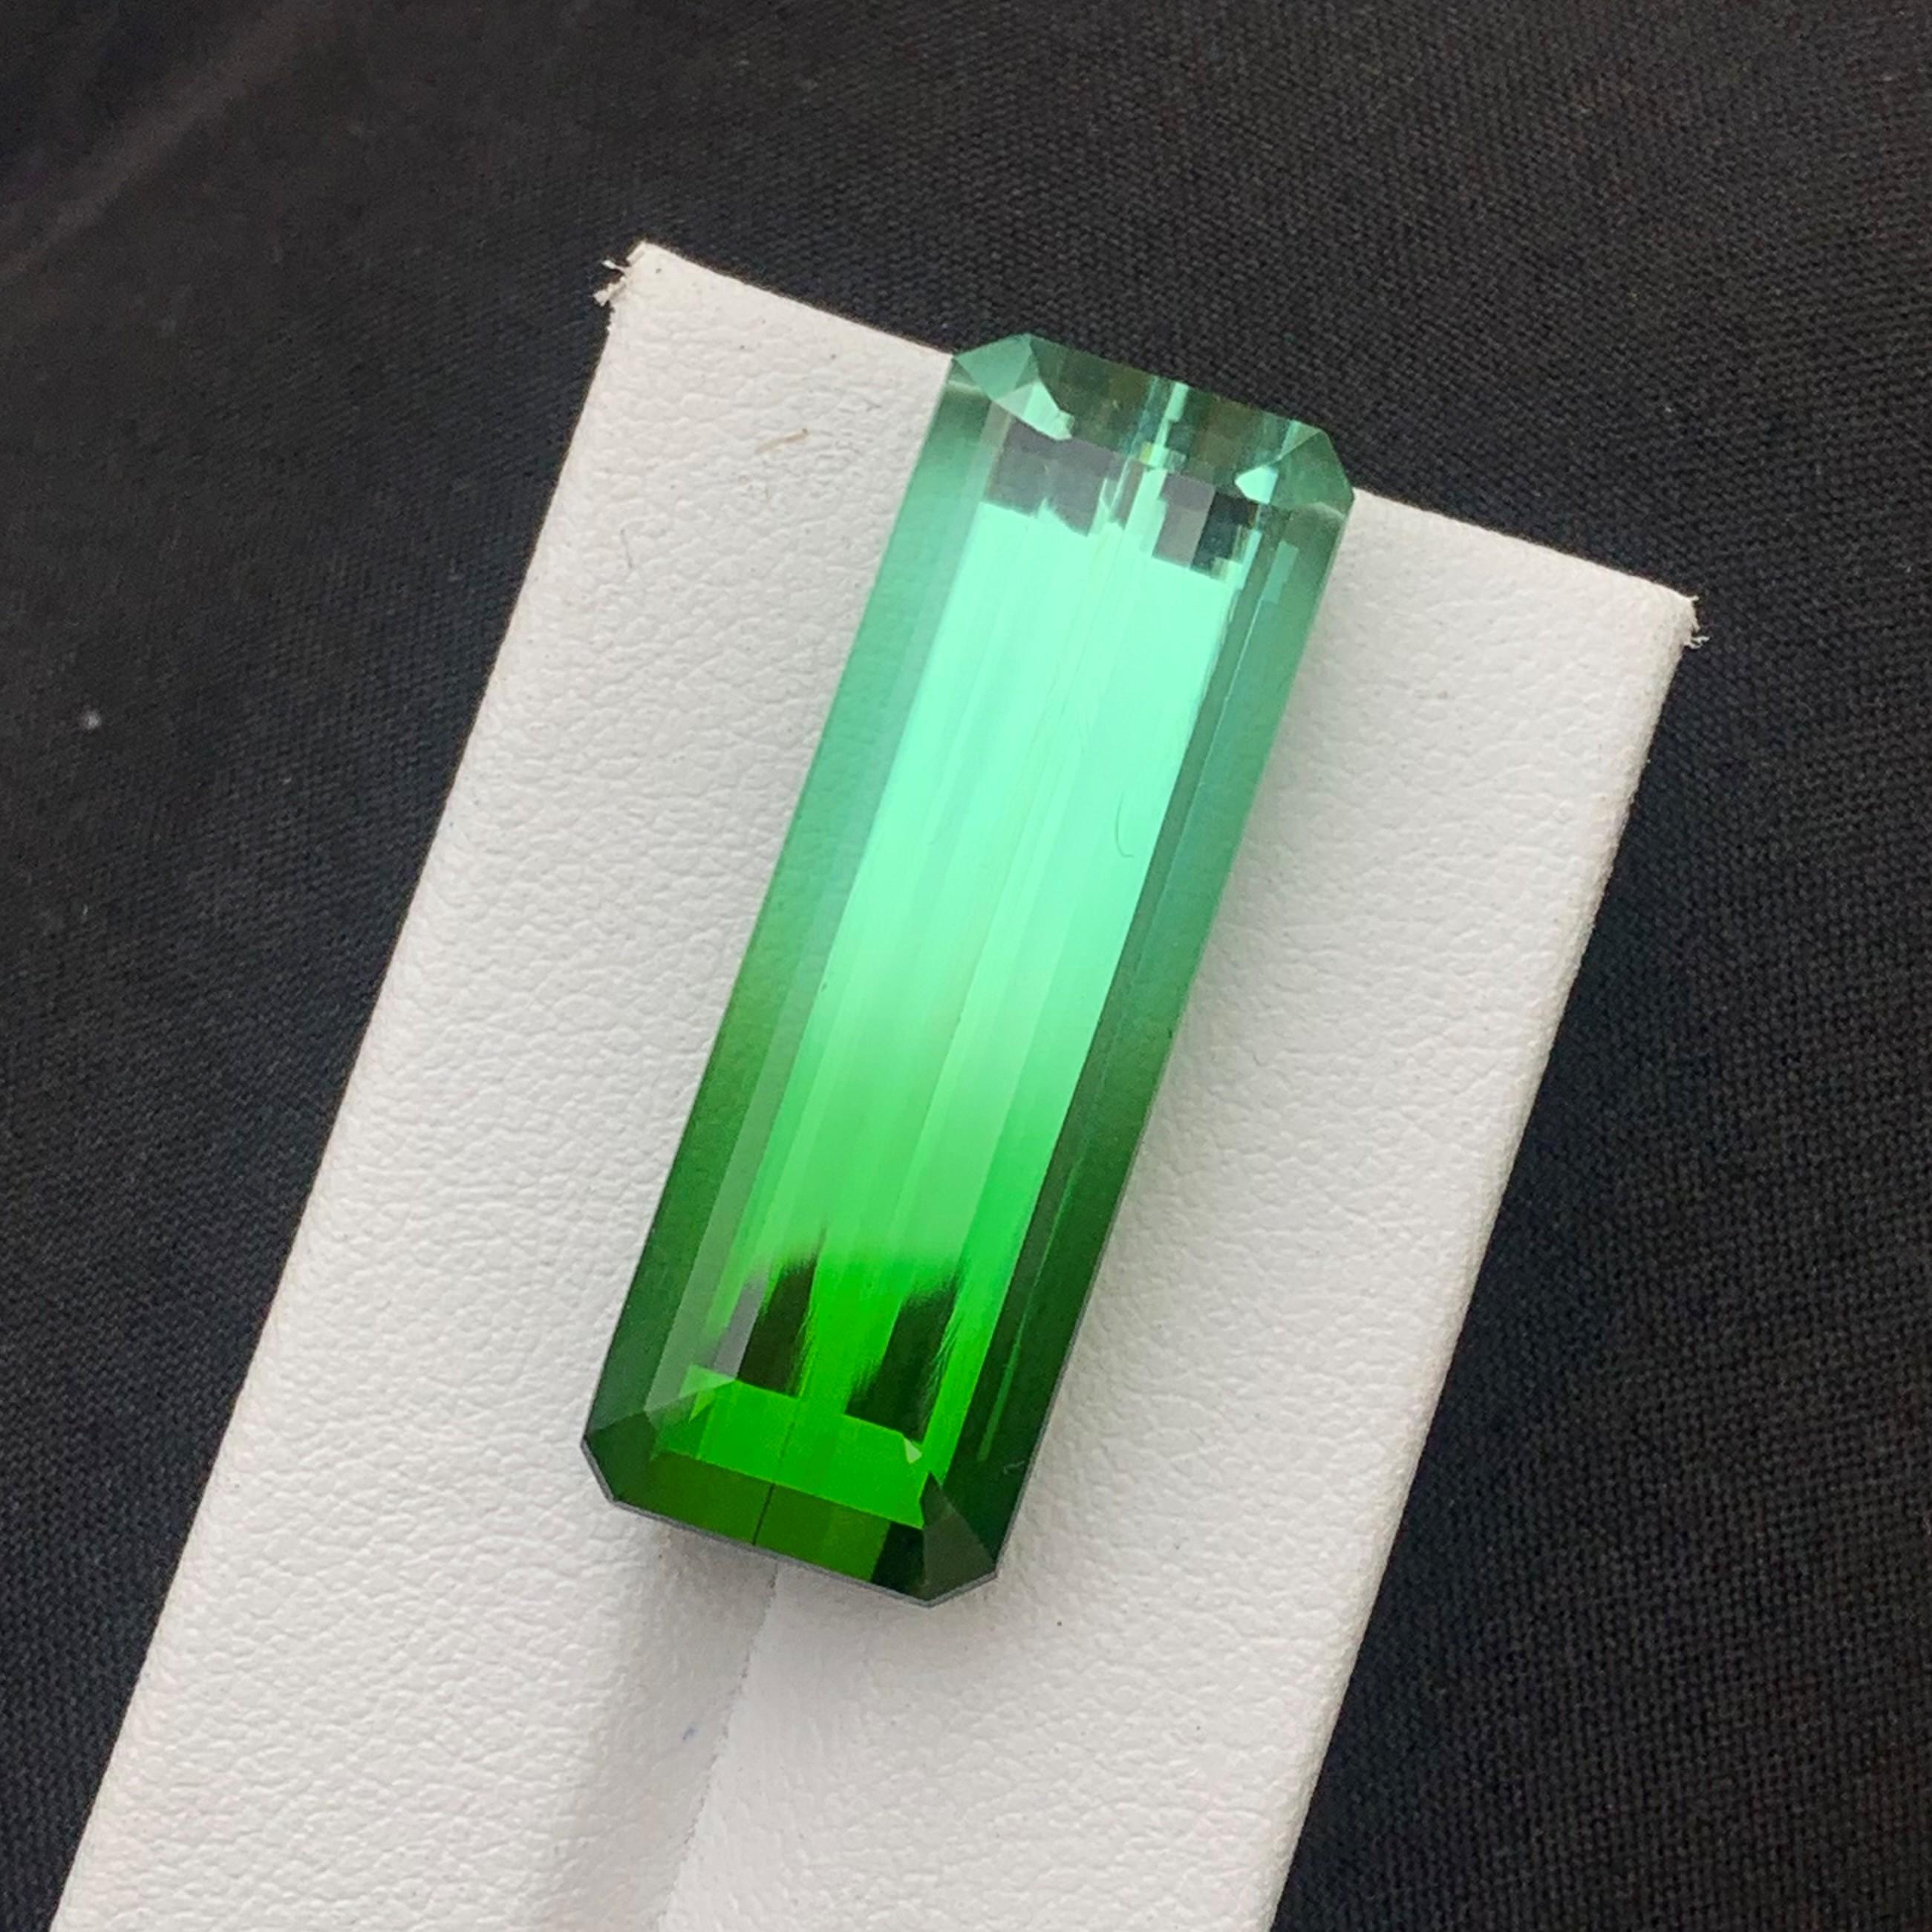 Faceted Bicolor Tourmaline
Weight: 43.87 Carats
Dimension: 34.75x12.10x10.69 Mm
Origin: Afghanistan
Color: Bluish green & Seafoam Green
Shape: Emerald Cut
Quality: AAA 
Certificate: Available
.
Bicolor tourmaline is connected to the heart chakra,